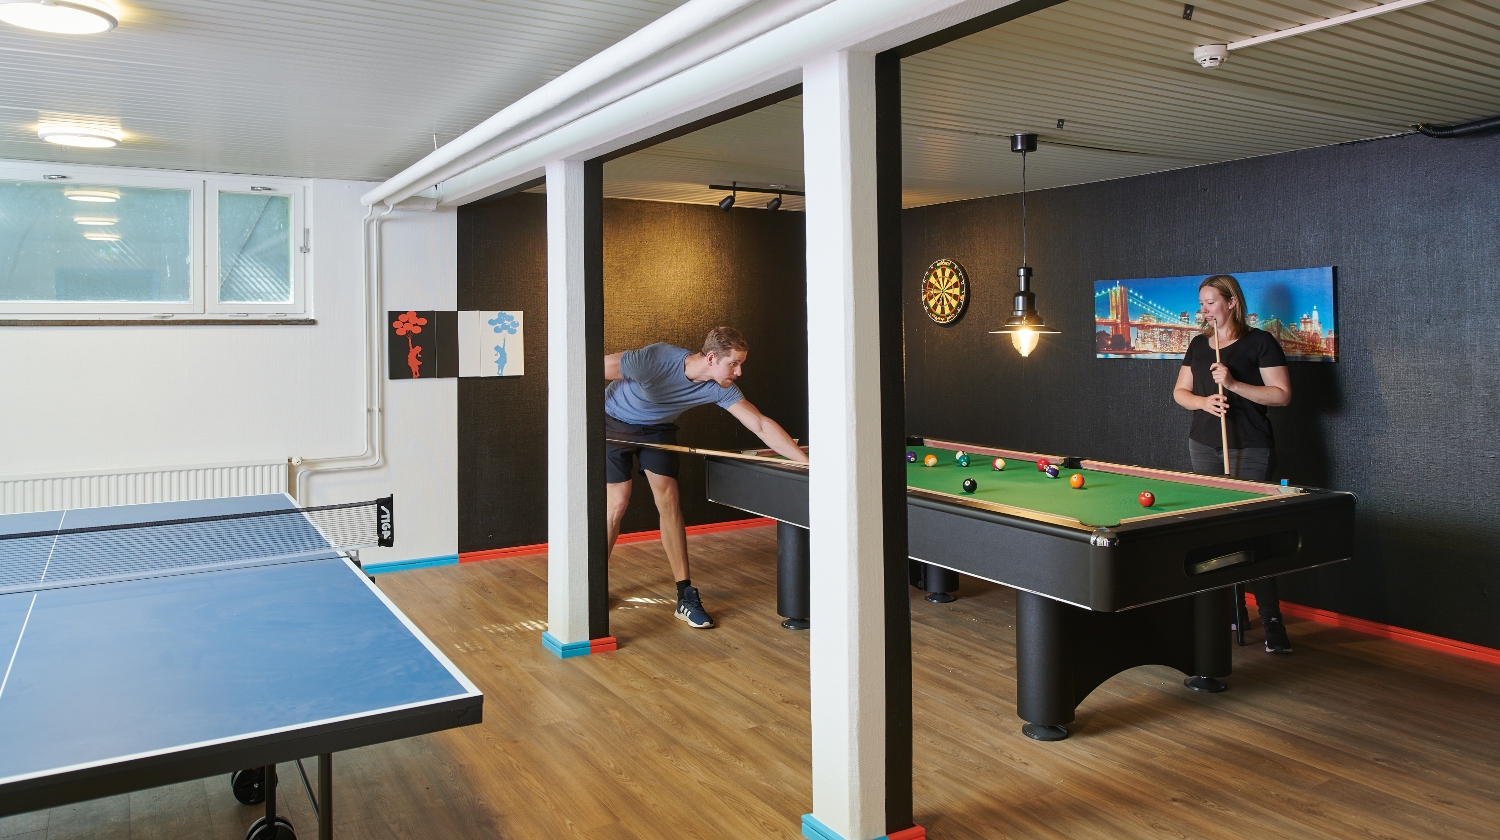 Game room with a ping pong table and two students playing pool